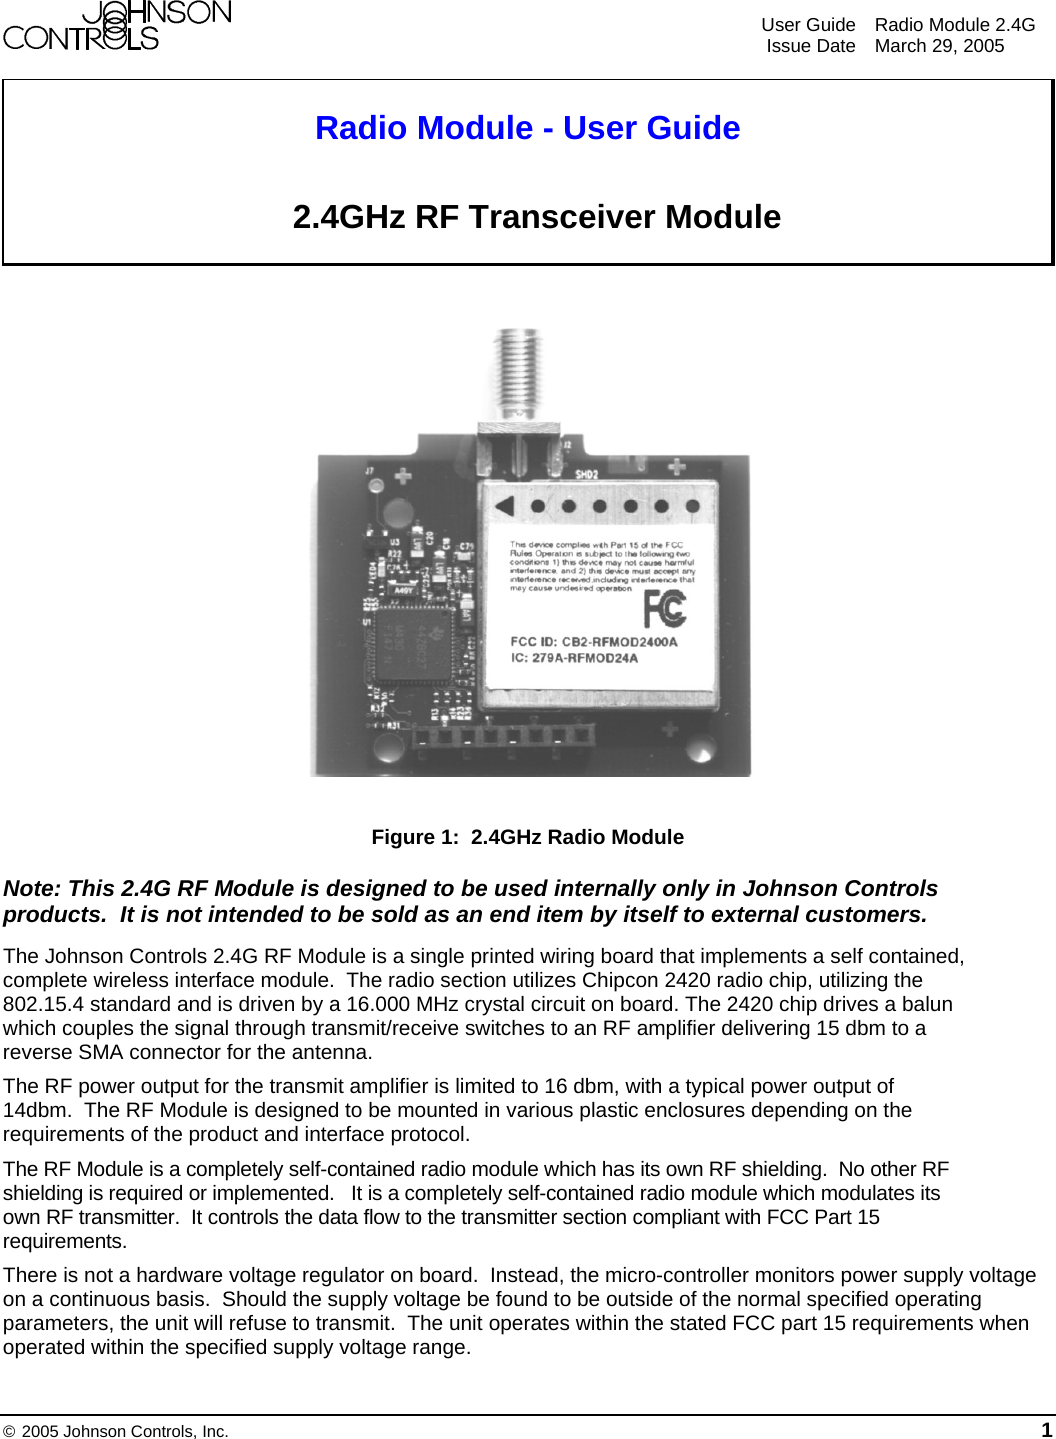    User Guide  Radio Module 2.4G  Issue Date  March 29, 2005  © 2005 Johnson Controls, Inc. 1       Radio Module - User Guide   2.4GHz RF Transceiver Module                                                   Figure 1:  2.4GHz Radio Module Note: This 2.4G RF Module is designed to be used internally only in Johnson Controls products.  It is not intended to be sold as an end item by itself to external customers. The Johnson Controls 2.4G RF Module is a single printed wiring board that implements a self contained, complete wireless interface module.  The radio section utilizes Chipcon 2420 radio chip, utilizing the 802.15.4 standard and is driven by a 16.000 MHz crystal circuit on board. The 2420 chip drives a balun which couples the signal through transmit/receive switches to an RF amplifier delivering 15 dbm to a reverse SMA connector for the antenna.  The RF power output for the transmit amplifier is limited to 16 dbm, with a typical power output of 14dbm.  The RF Module is designed to be mounted in various plastic enclosures depending on the requirements of the product and interface protocol.   The RF Module is a completely self-contained radio module which has its own RF shielding.  No other RF shielding is required or implemented.   It is a completely self-contained radio module which modulates its own RF transmitter.  It controls the data flow to the transmitter section compliant with FCC Part 15 requirements. There is not a hardware voltage regulator on board.  Instead, the micro-controller monitors power supply voltage on a continuous basis.  Should the supply voltage be found to be outside of the normal specified operating parameters, the unit will refuse to transmit.  The unit operates within the stated FCC part 15 requirements when operated within the specified supply voltage range.  